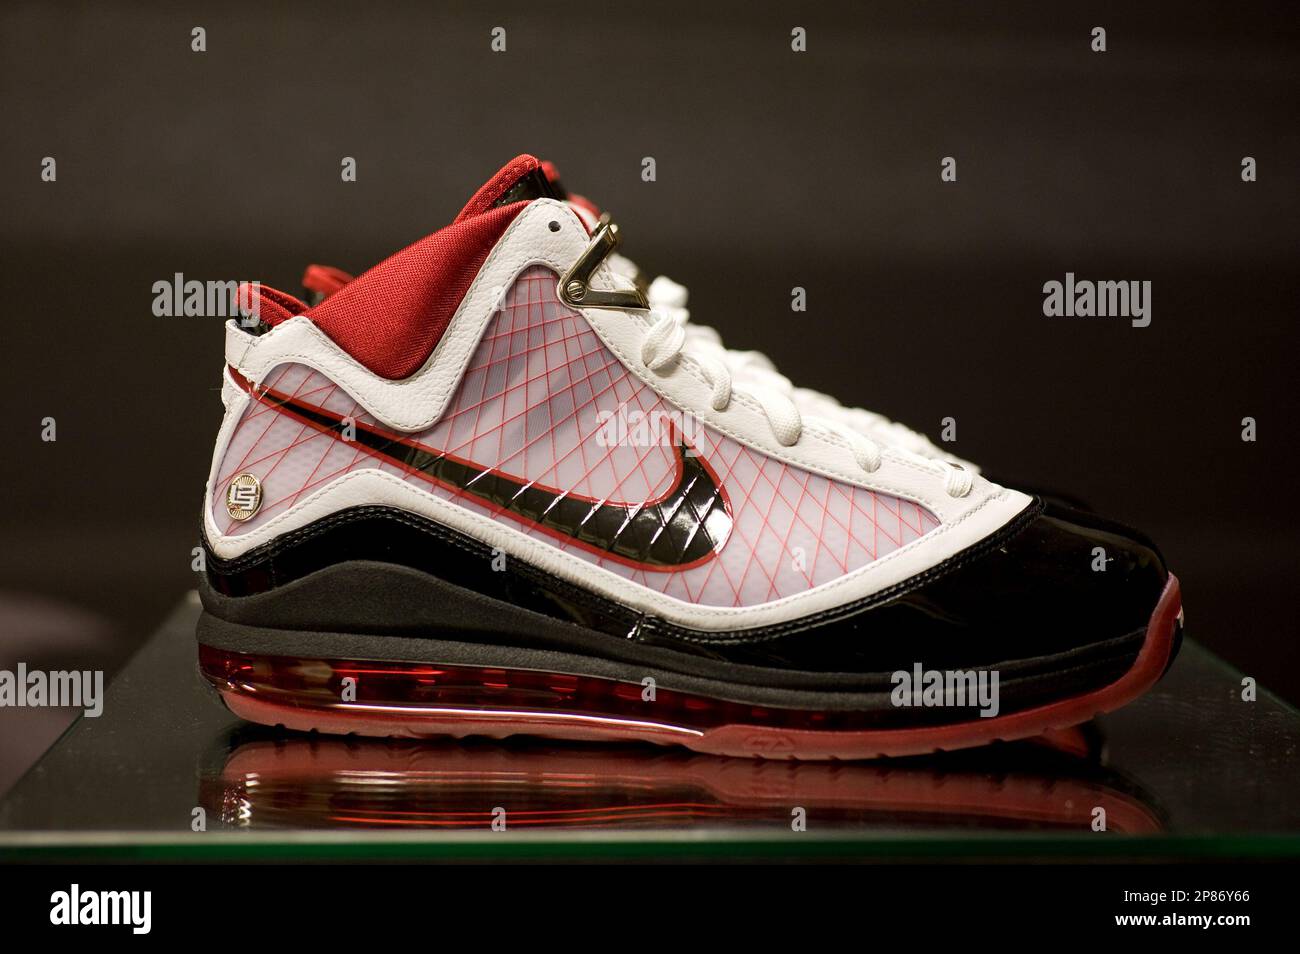 The new Nike Air Max LeBron VII shoes is displayed during an event at Ed  Davis Community Center in Akron, Ohio on Friday, Aug. 7, 2009 in Cleveland,  Ohio. (AP Photo/Jason Miller